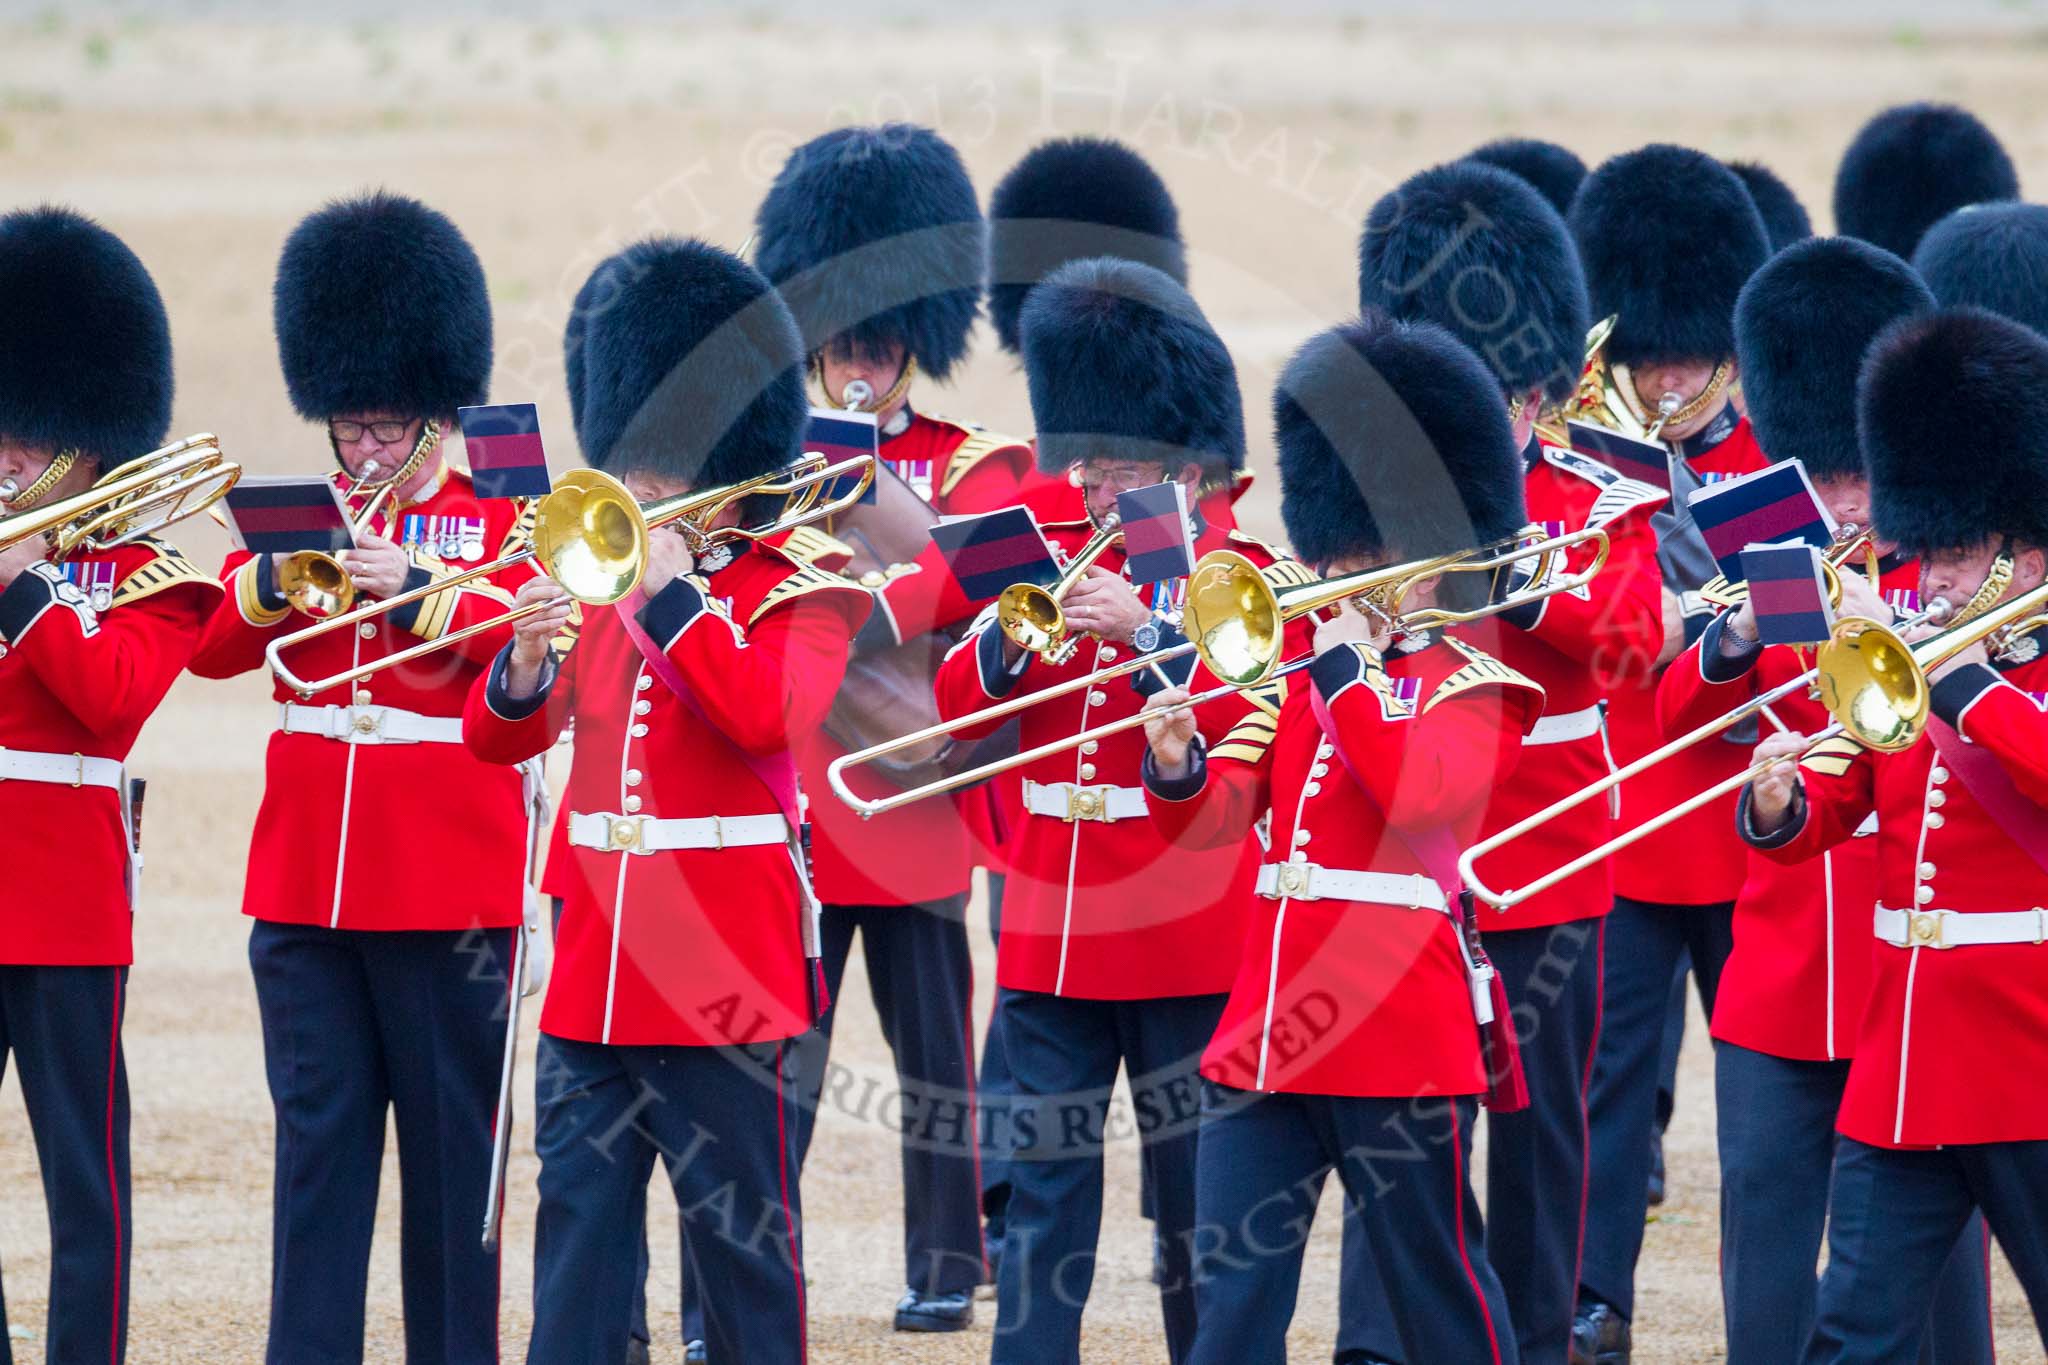 Trooping the Colour 2015. Image #63, 13 June 2015 10:17 Horse Guards Parade, London, UK